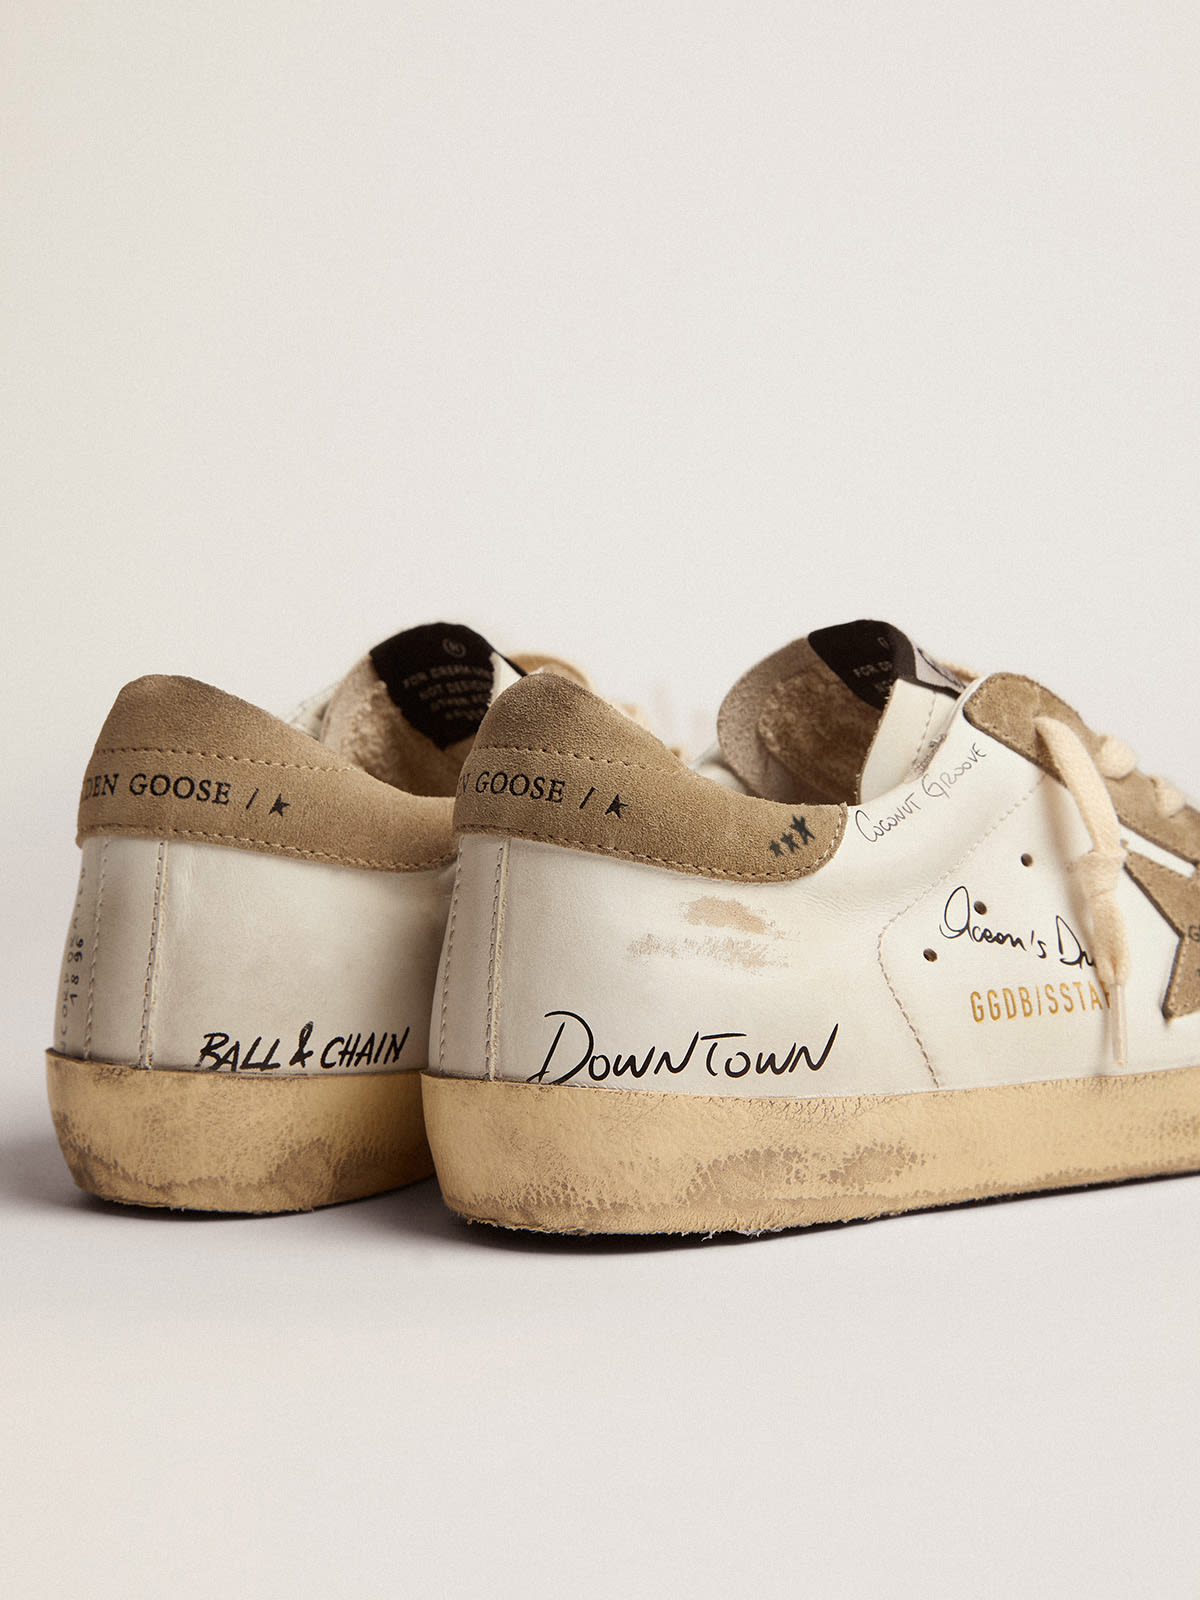 Golden Goose - Men's Super-Star in white leather with dove gray suede inserts in 